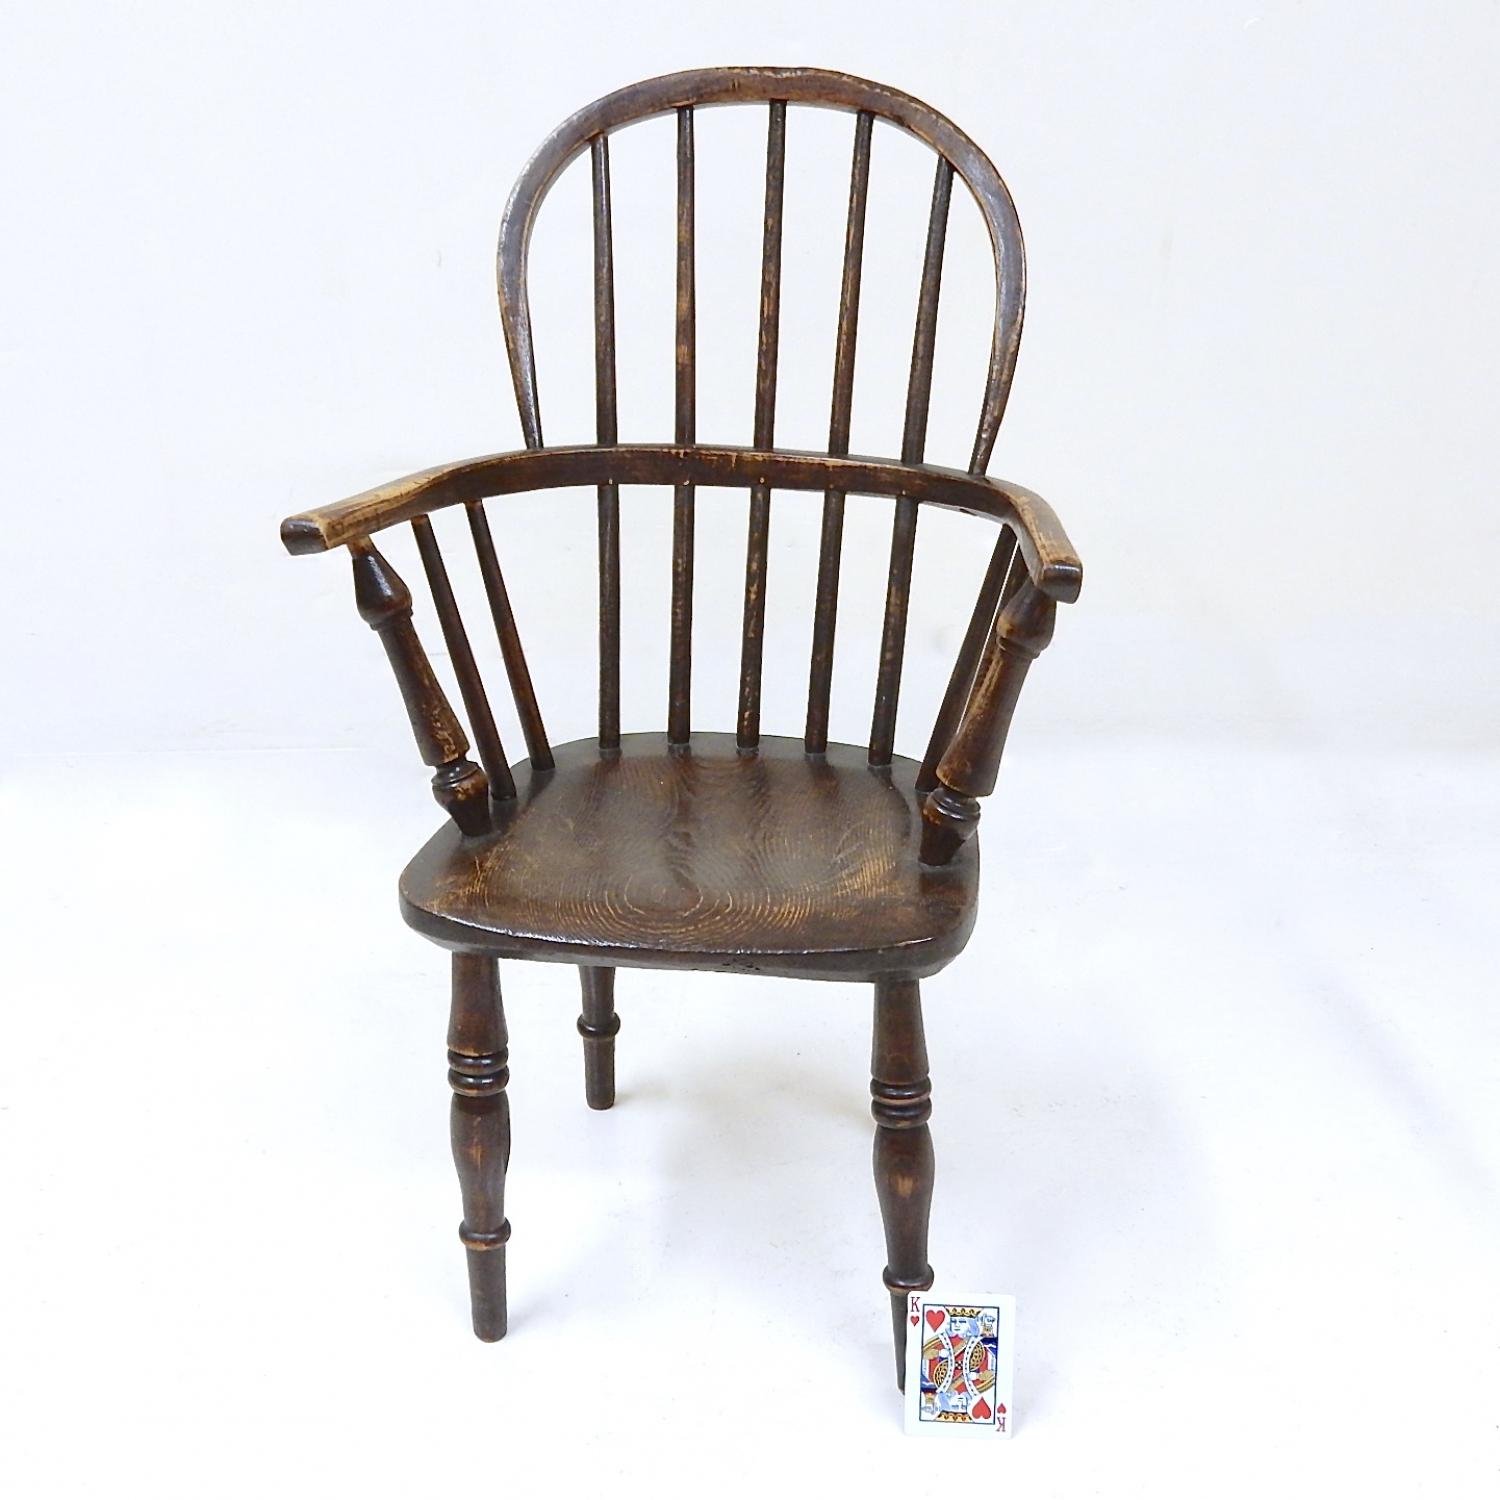 C19th Child's Windsor Chair